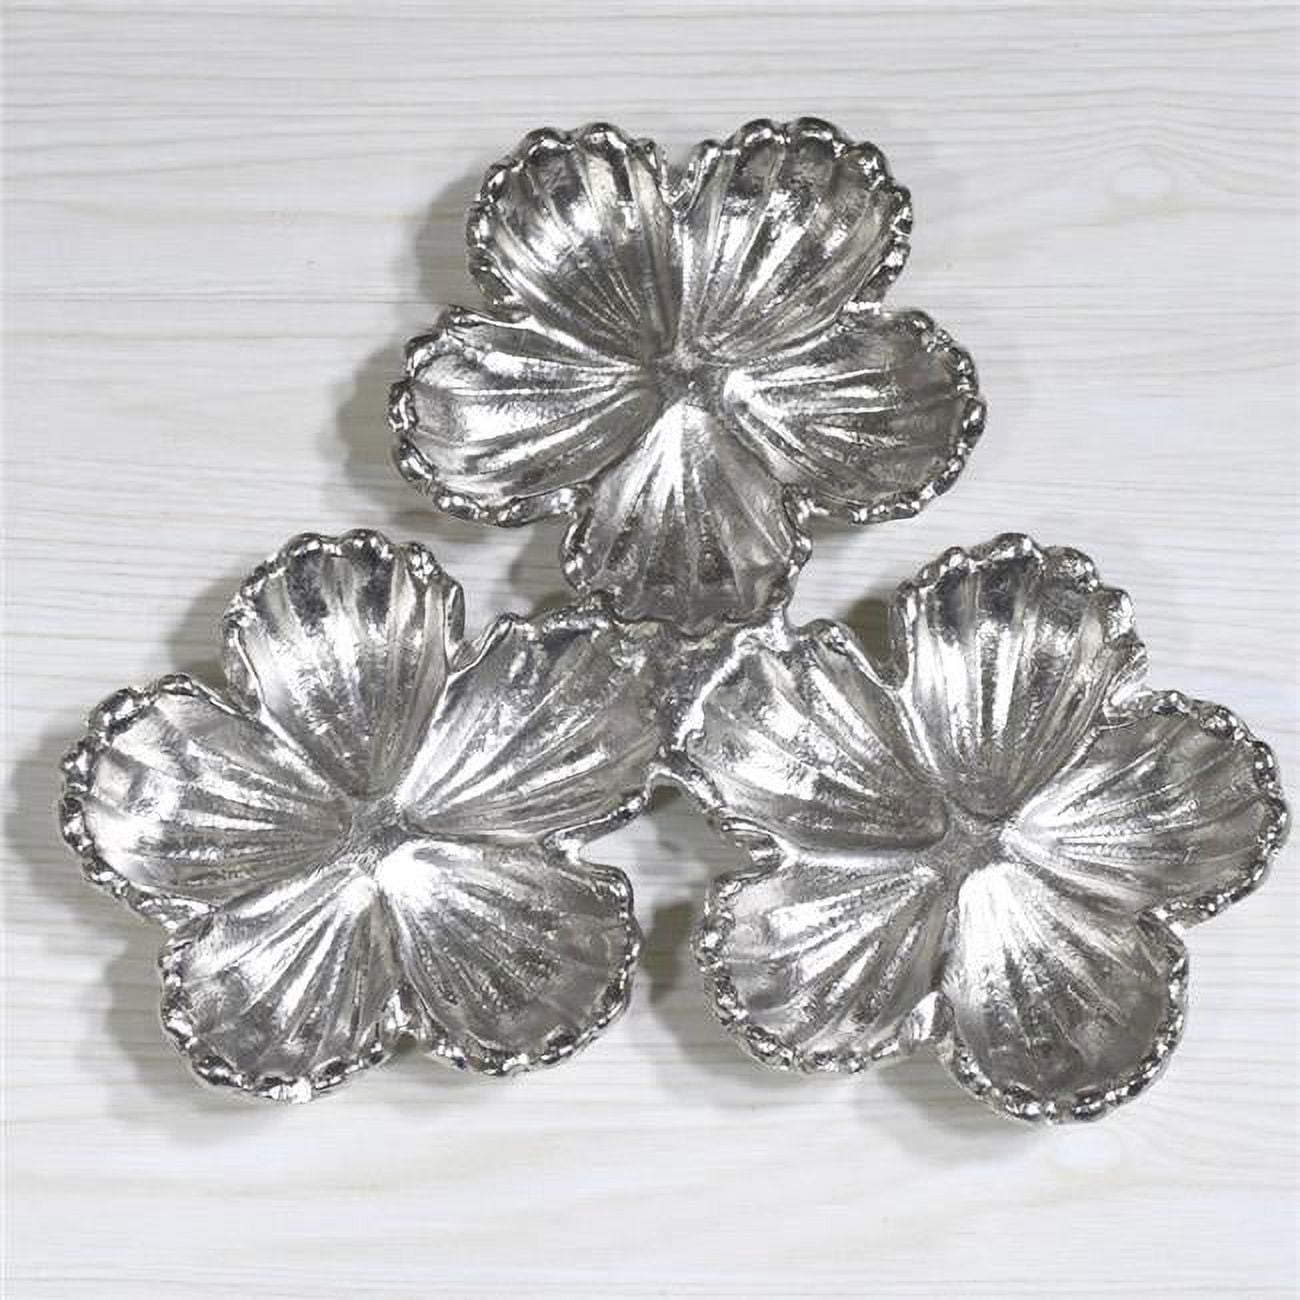 Picture of BBH Homes UBBBVK039AB2020SC1HS 8.26 x 8.26 x 0.98 in. Handmade Silver Coated Decorative Aluminum Tray